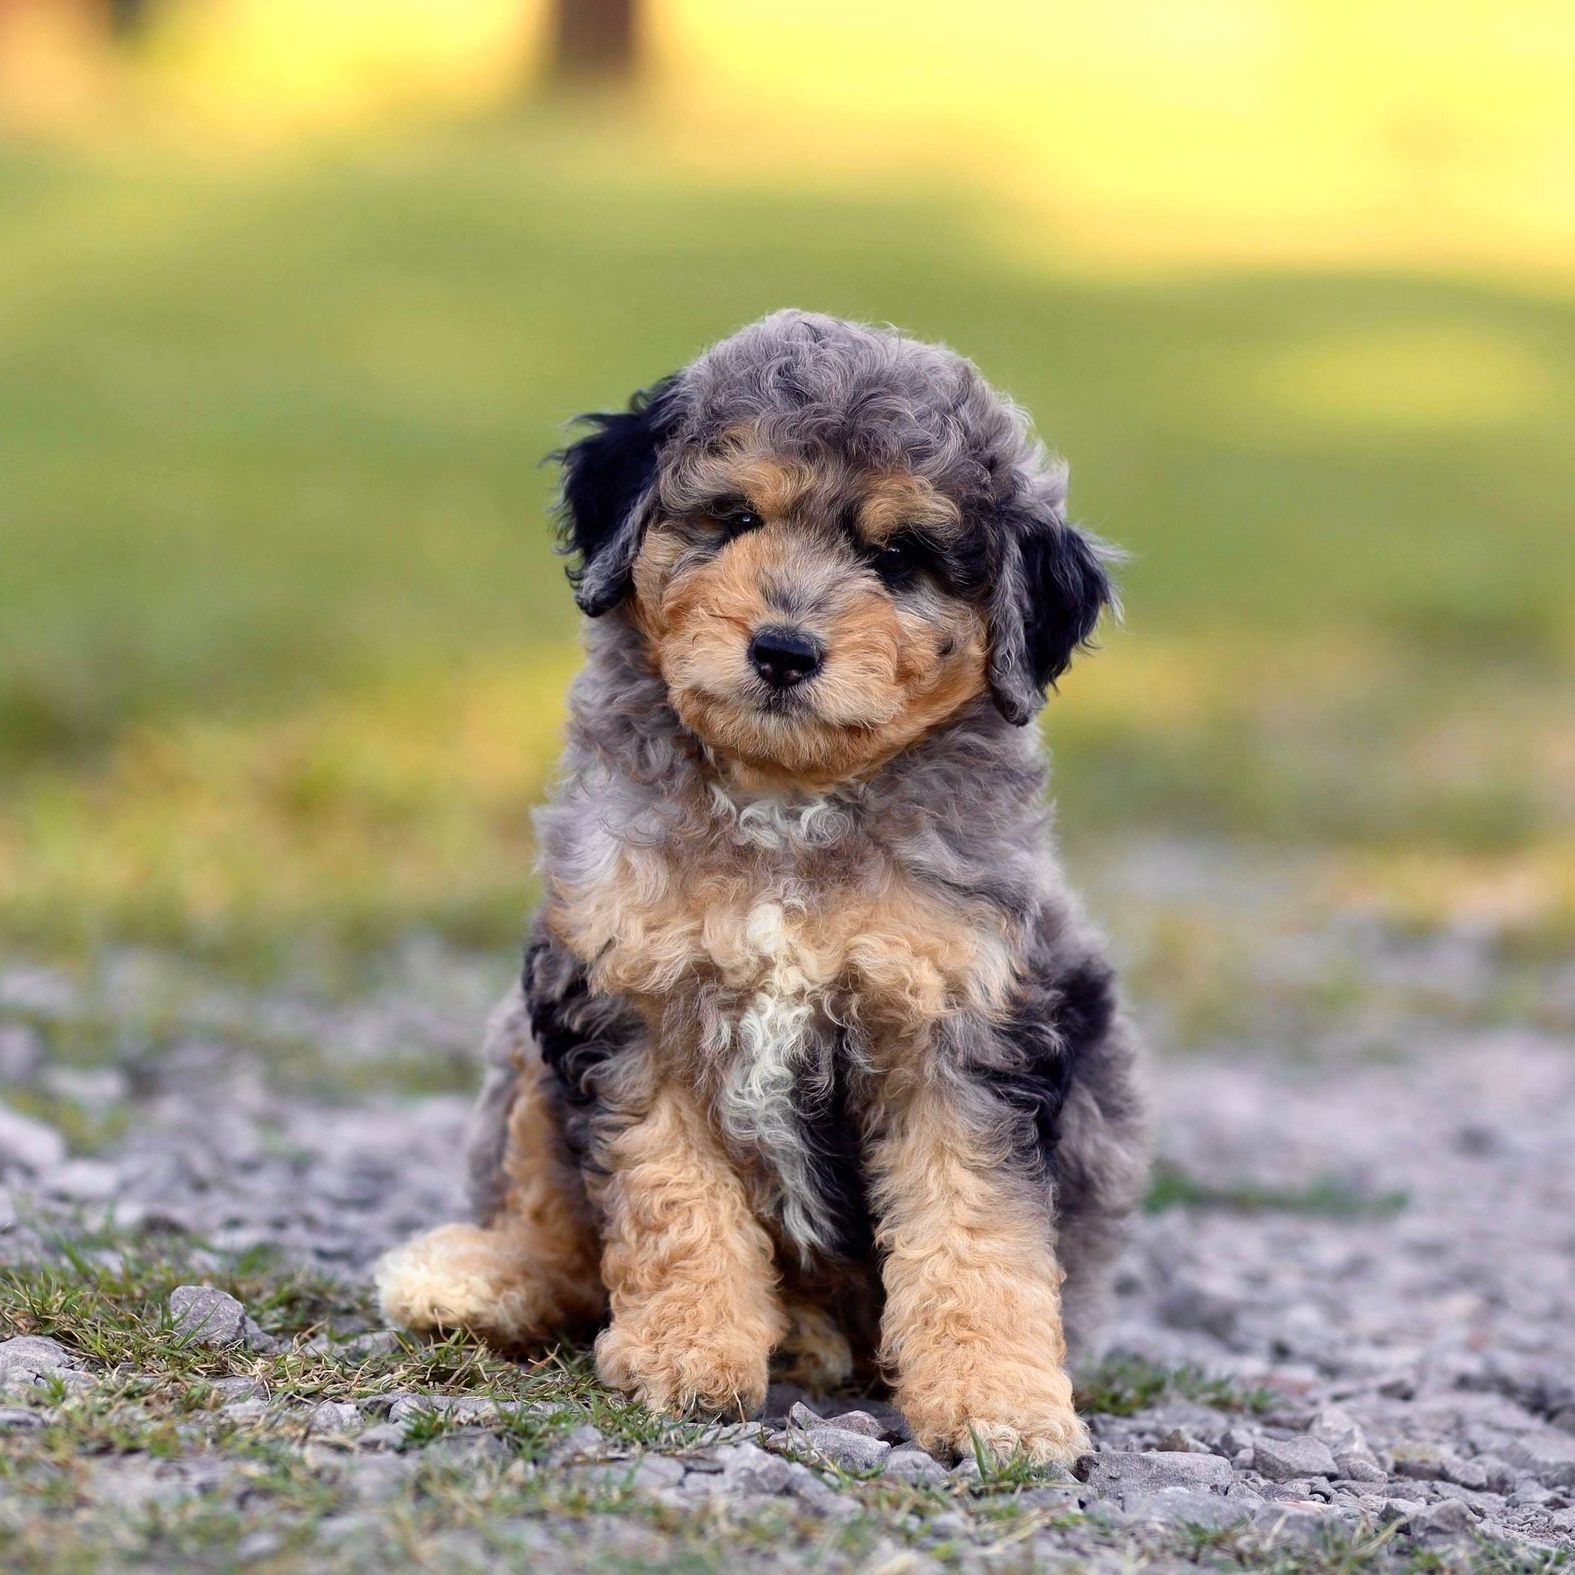 A brown and black puppy is sitting on the ground looking at the camera.